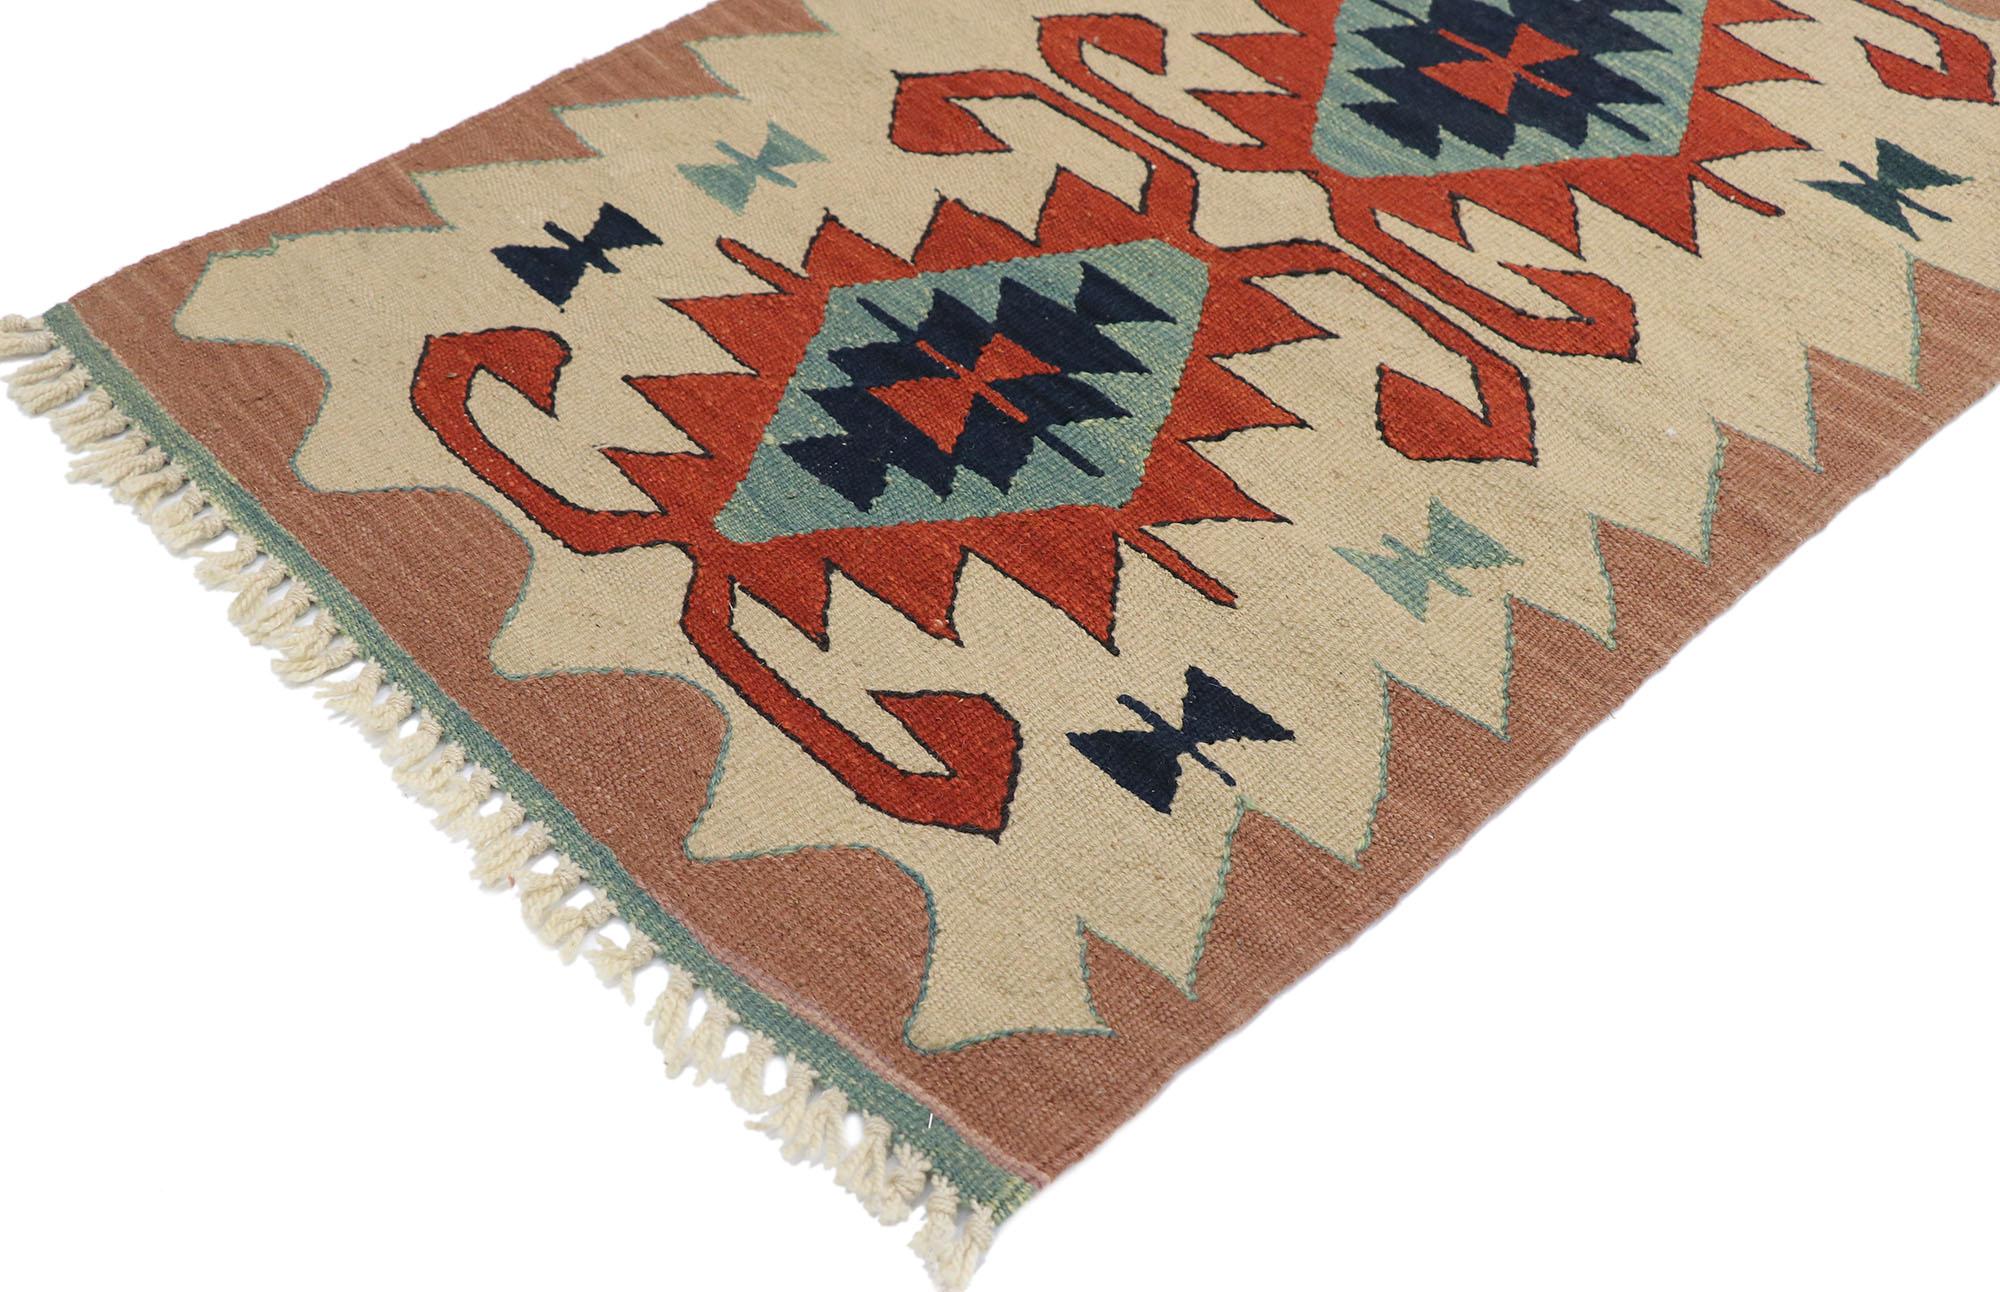 77859, vintage Persian Shiraz Kilim rug with Tribal style. Full of tiny details and a bold expressive design combined with vibrant colors and tribal style, this hand-woven wool vintage Persian Shiraz kilim rug is a captivating vision of woven